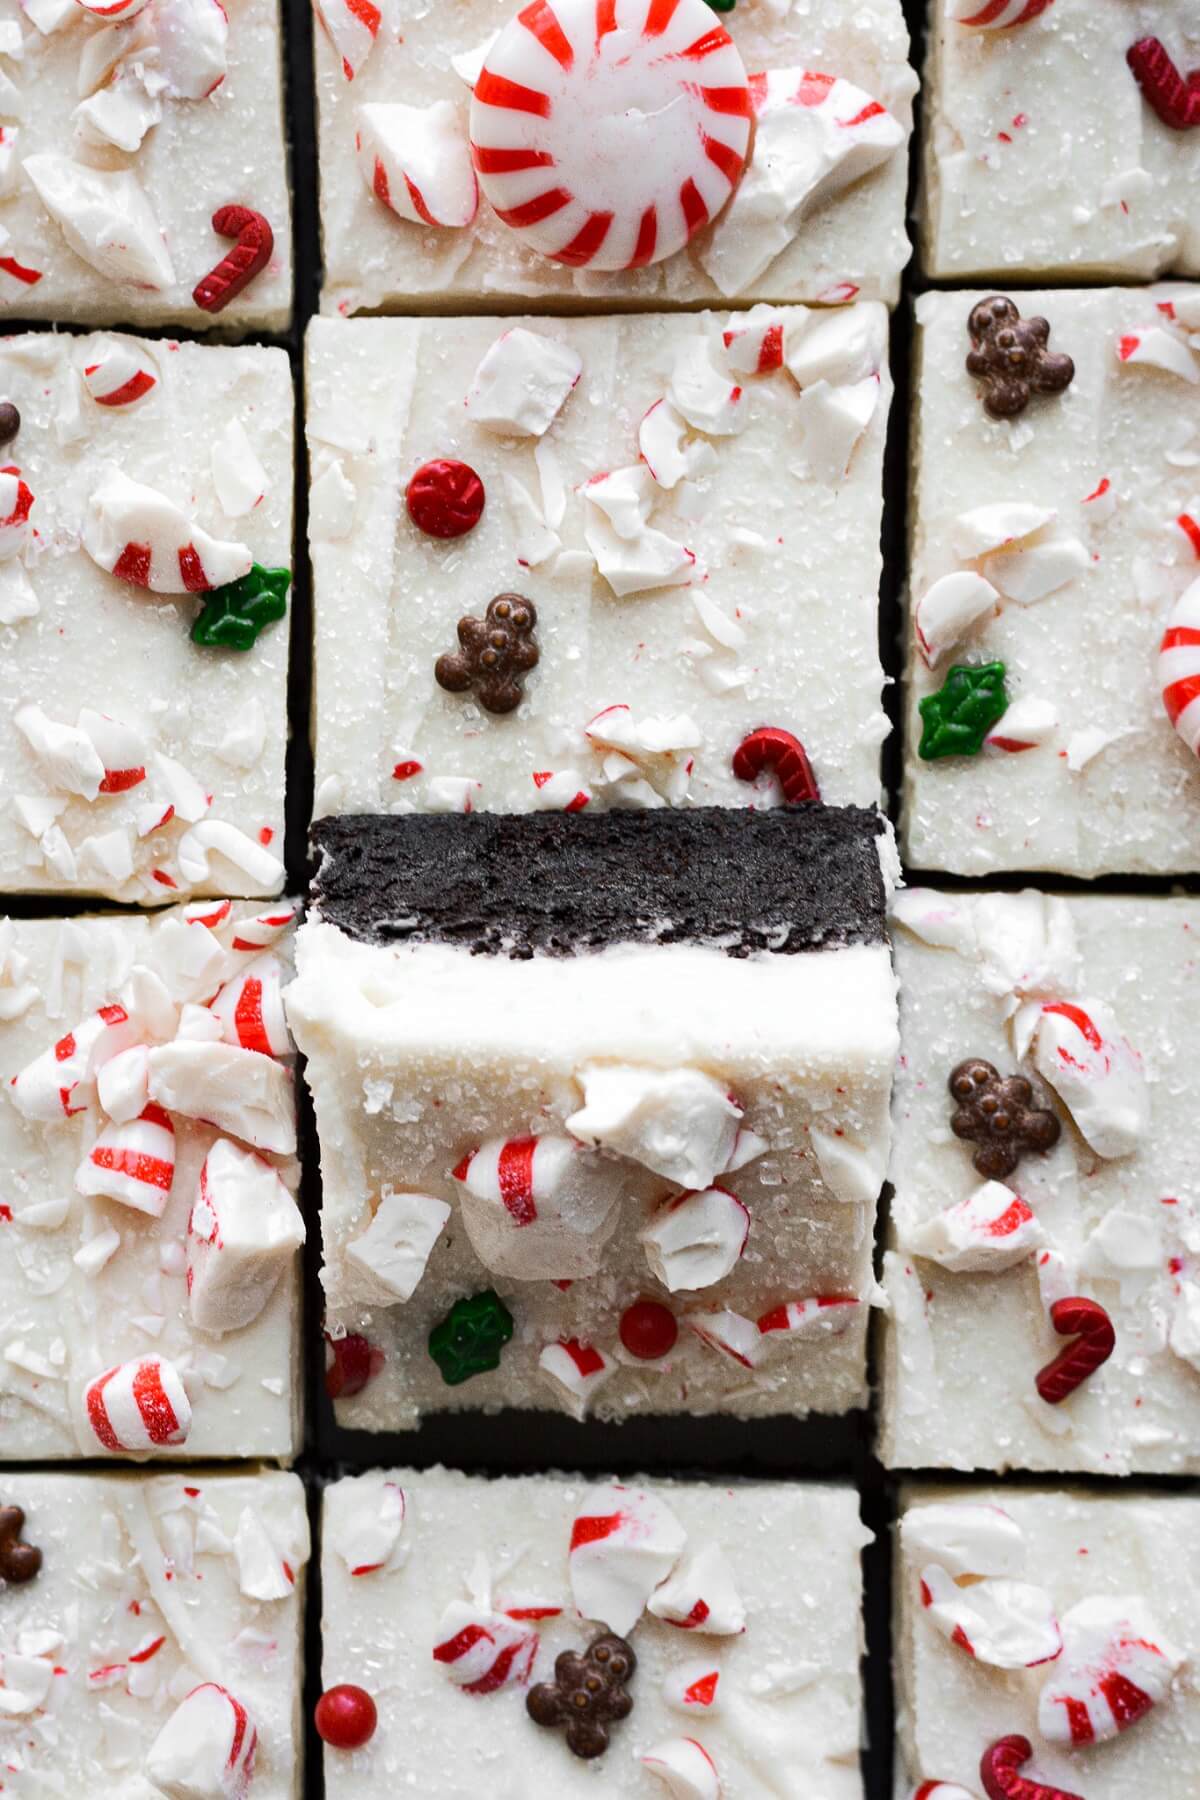 Peppermint brownies with cream cheese frosting and Christmas sprinkles.